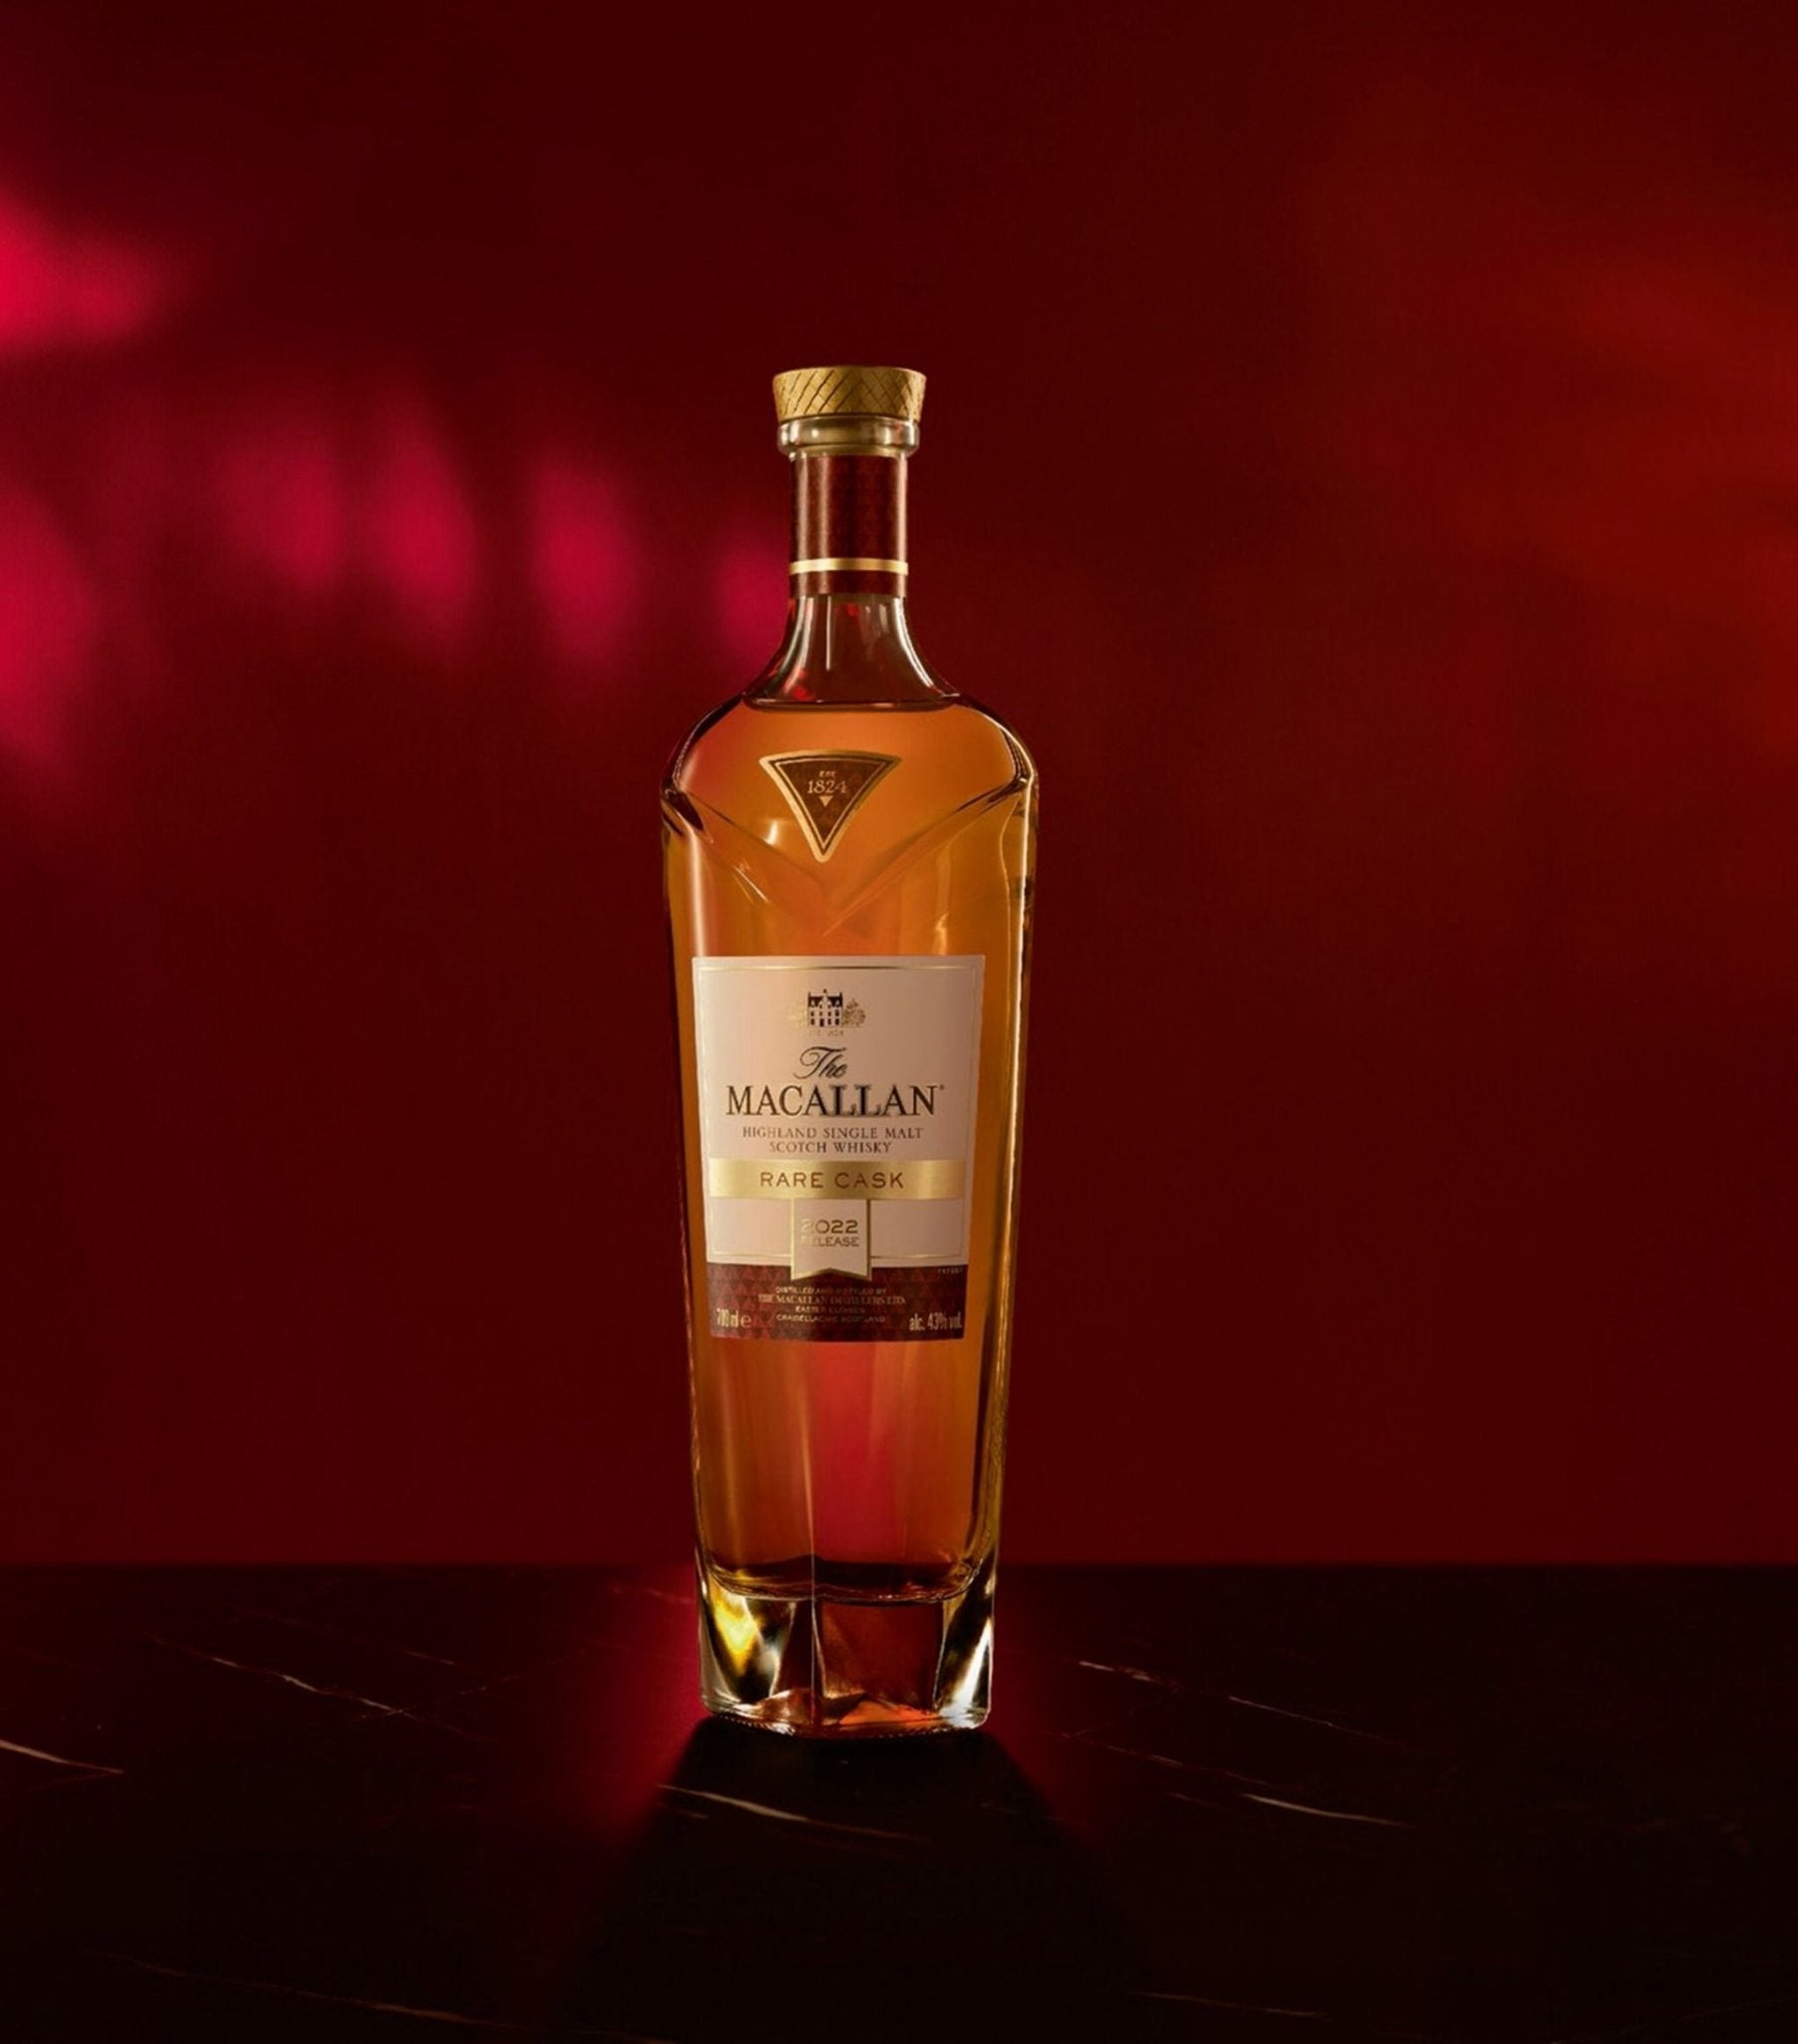 The Macallan Rare Cask Whisky | Exquisite Wine & Alcohol Gift Delivery Toronto Canada | Vyno